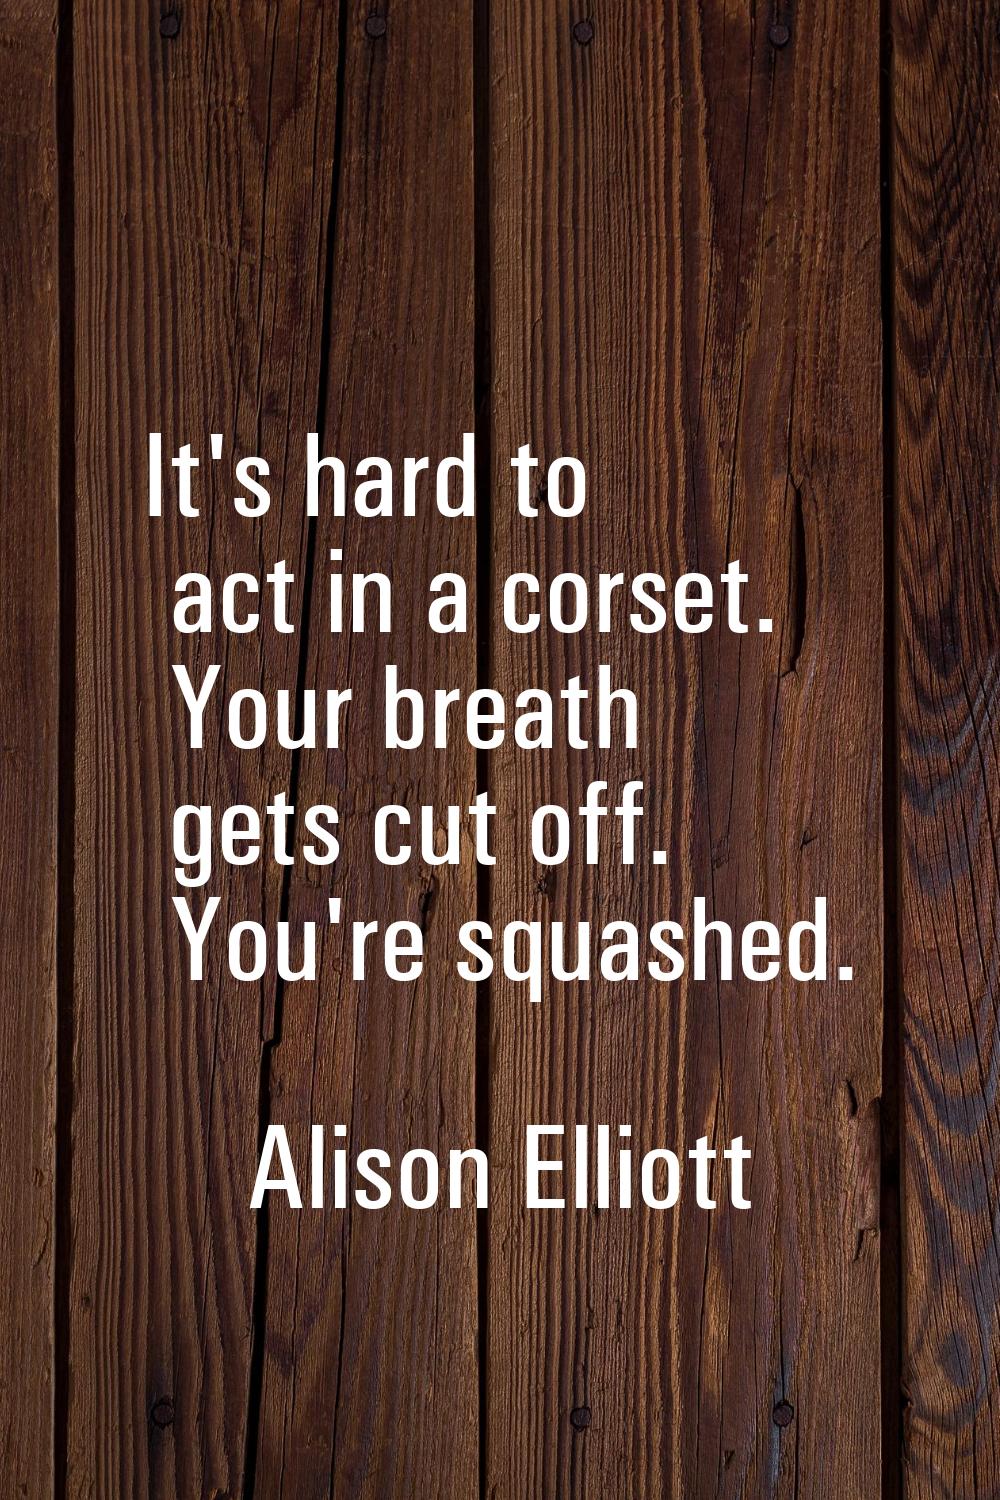 It's hard to act in a corset. Your breath gets cut off. You're squashed.